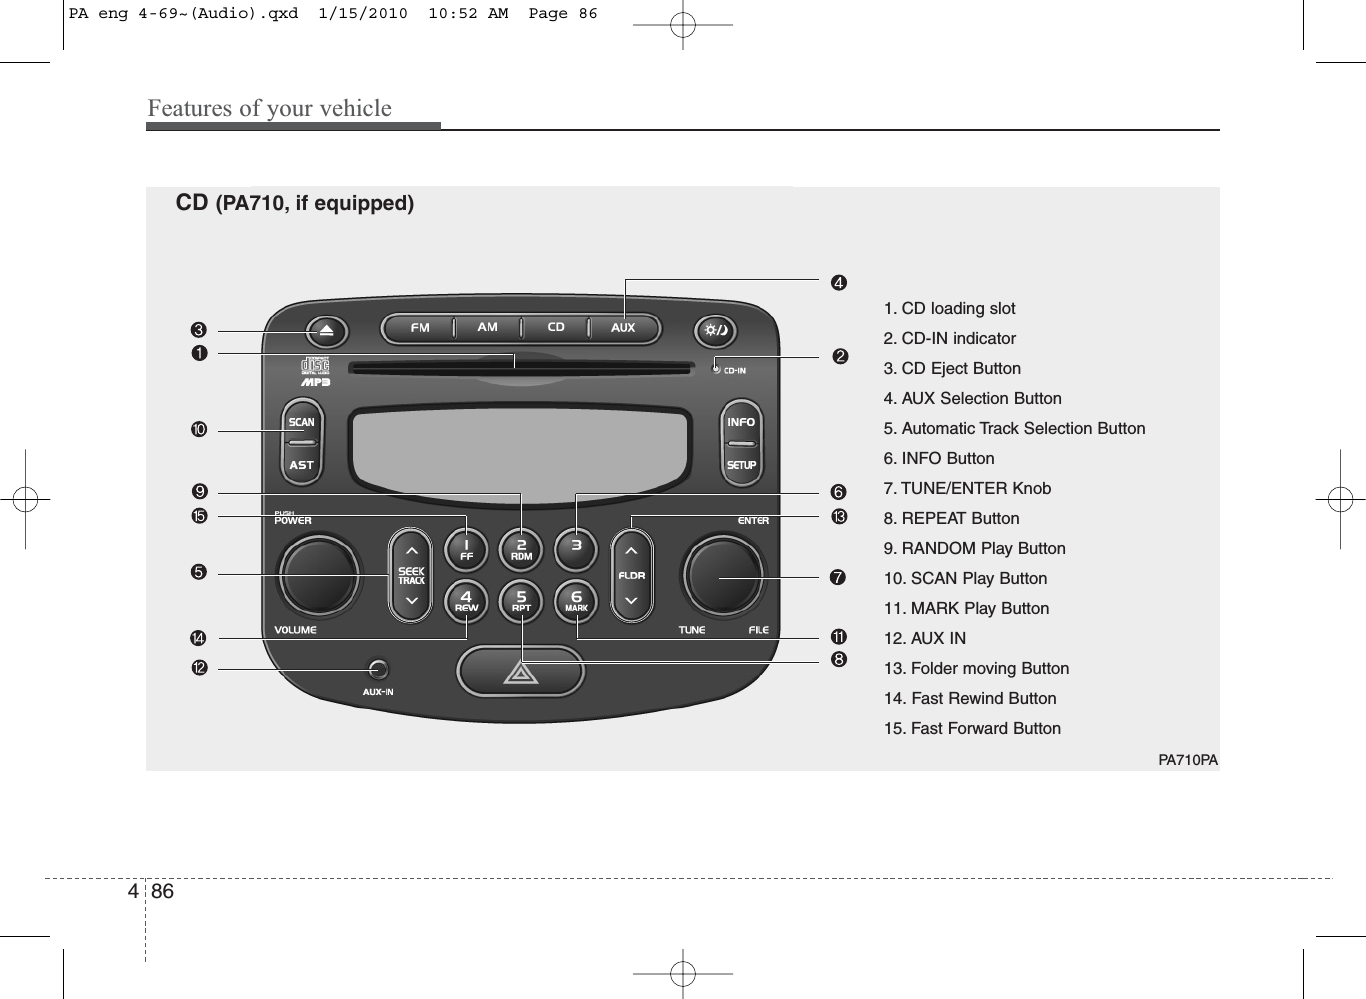 Features of your vehicle8641. CD loading slot2. CD-IN indicator3. CD Eject Button4. AUX Selection Button5. Automatic Track Selection Button6. INFO Button7. TUNE/ENTER Knob8. REPEAT Button9. RANDOM Play Button10. SCAN Play Button11. MARK Play Button12. AUX IN13. Folder moving Button14. Fast Rewind Button15. Fast Forward ButtonPA710PACD (PA710, if equipped)PA eng 4-69~(Audio).qxd  1/15/2010  10:52 AM  Page 86